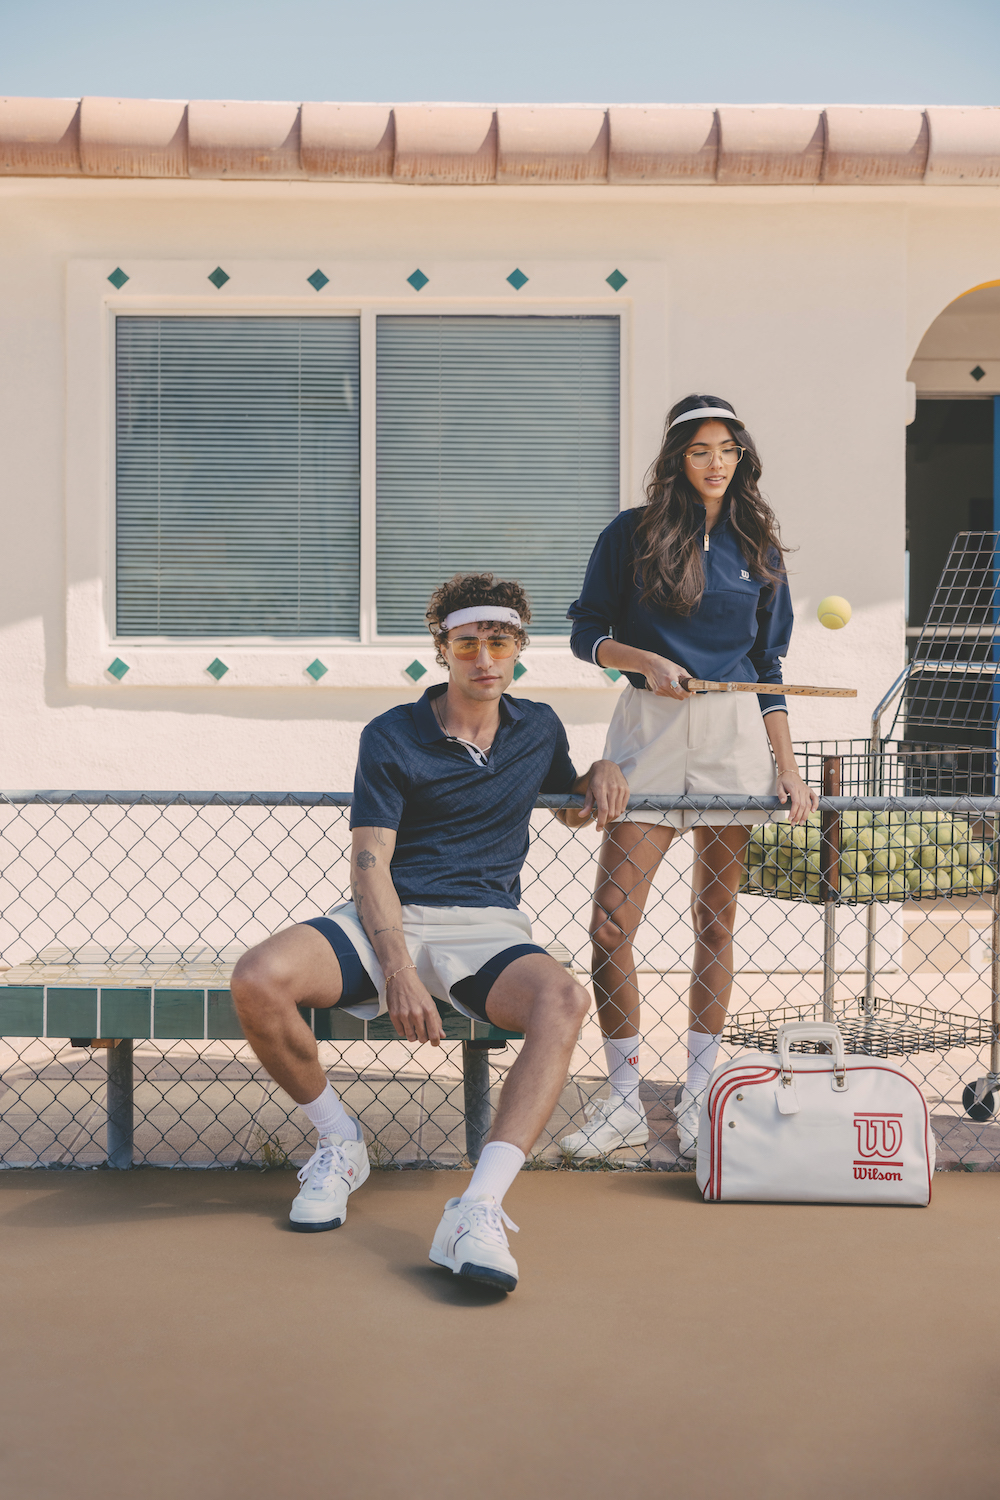  From Wilson's new tennis collection.